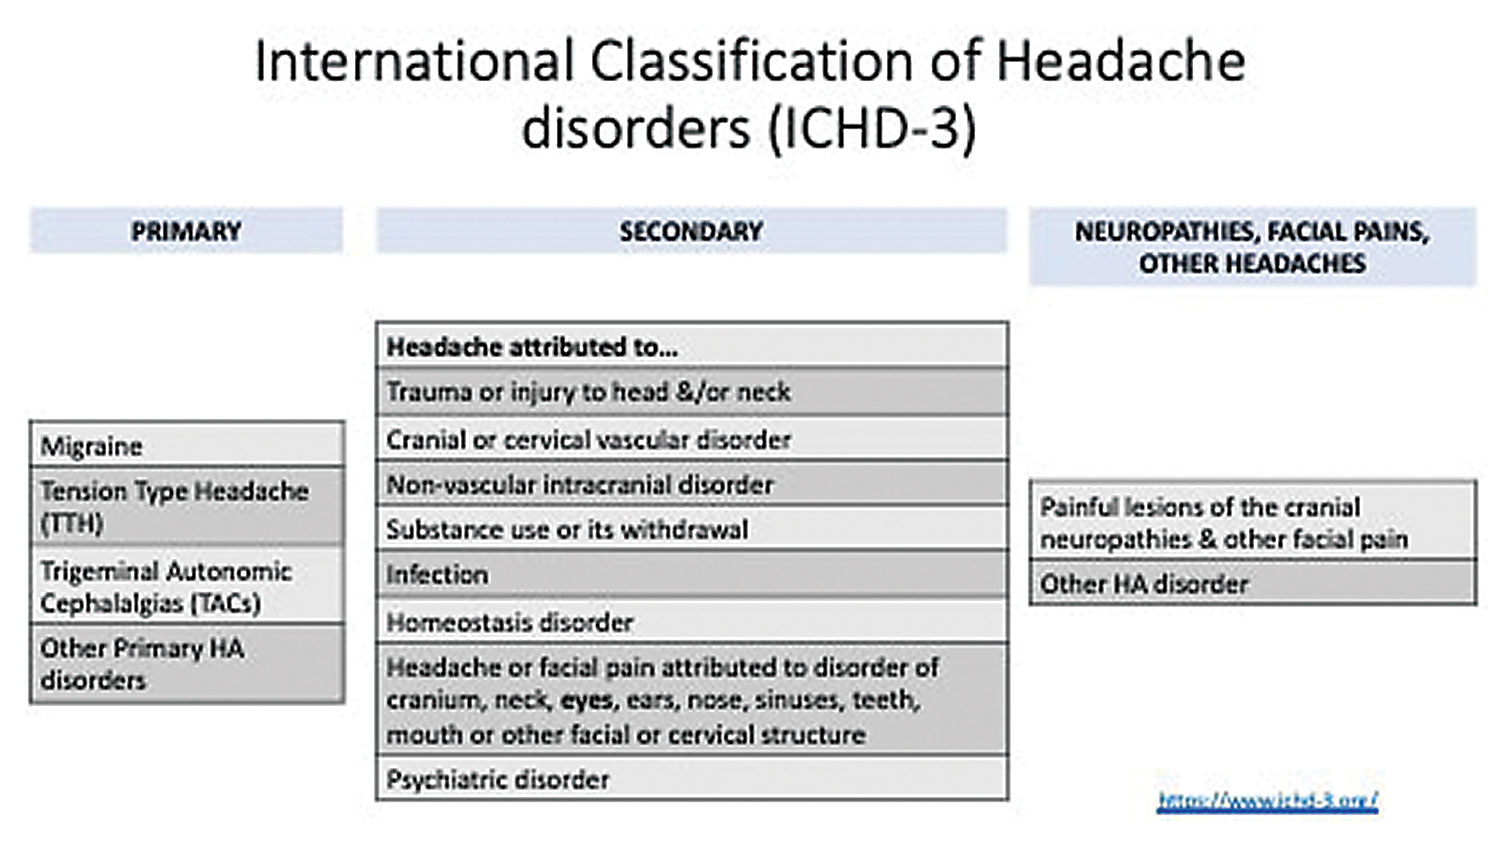 Headaches are primary or secondary depending on the etiology.